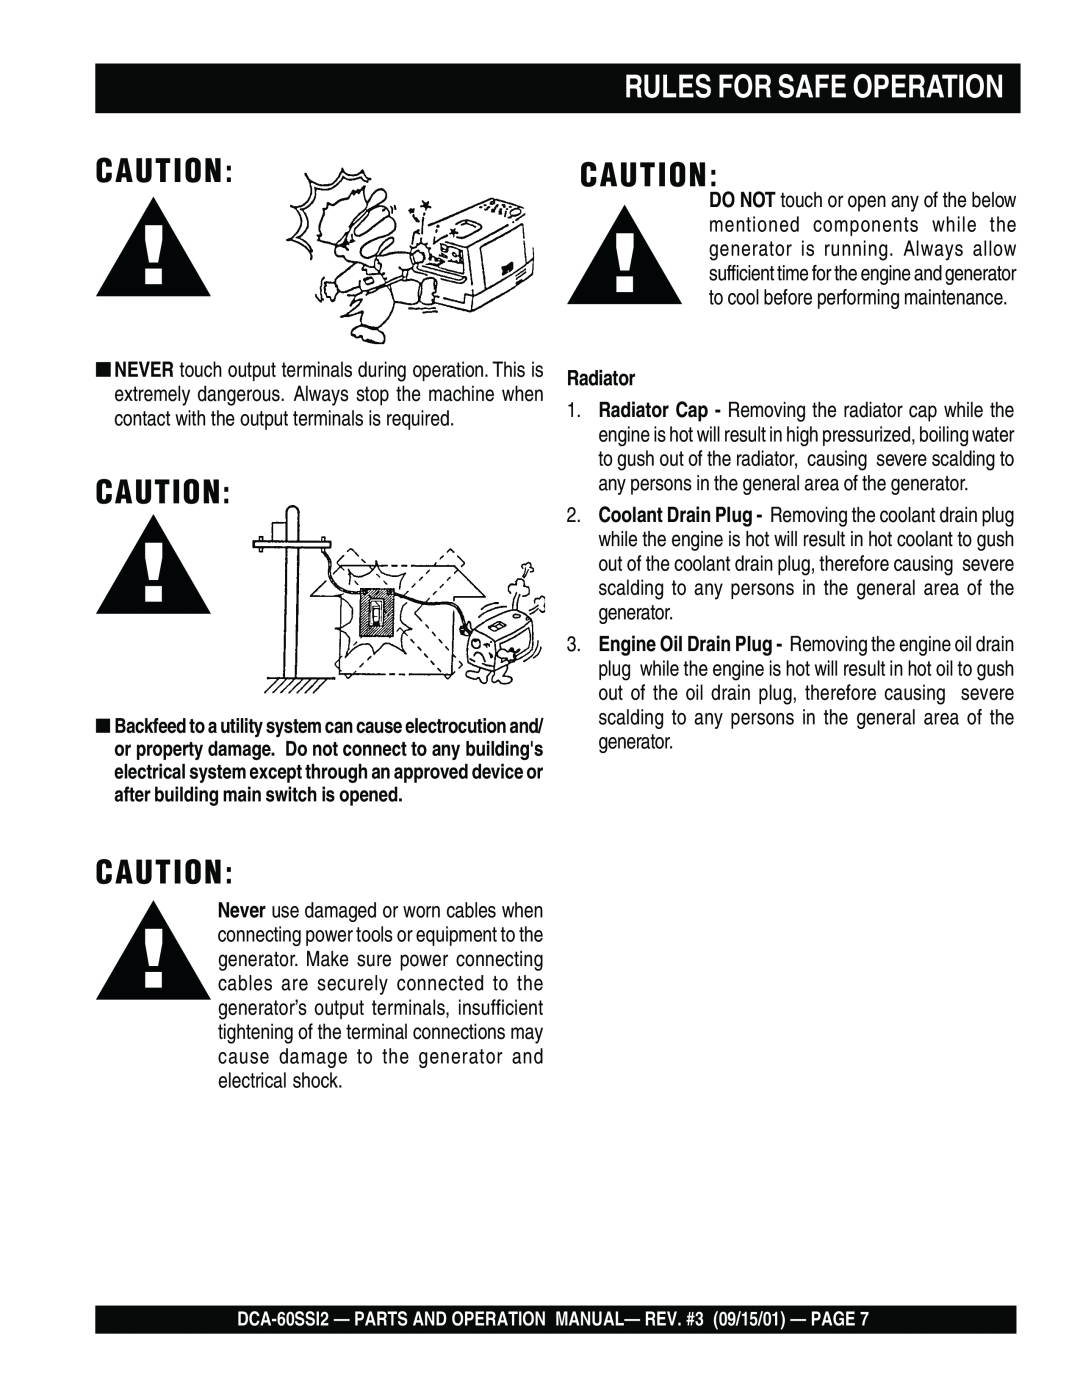 Multiquip DCA-60SS12 operation manual Rules For Safe Operation, Radiator 